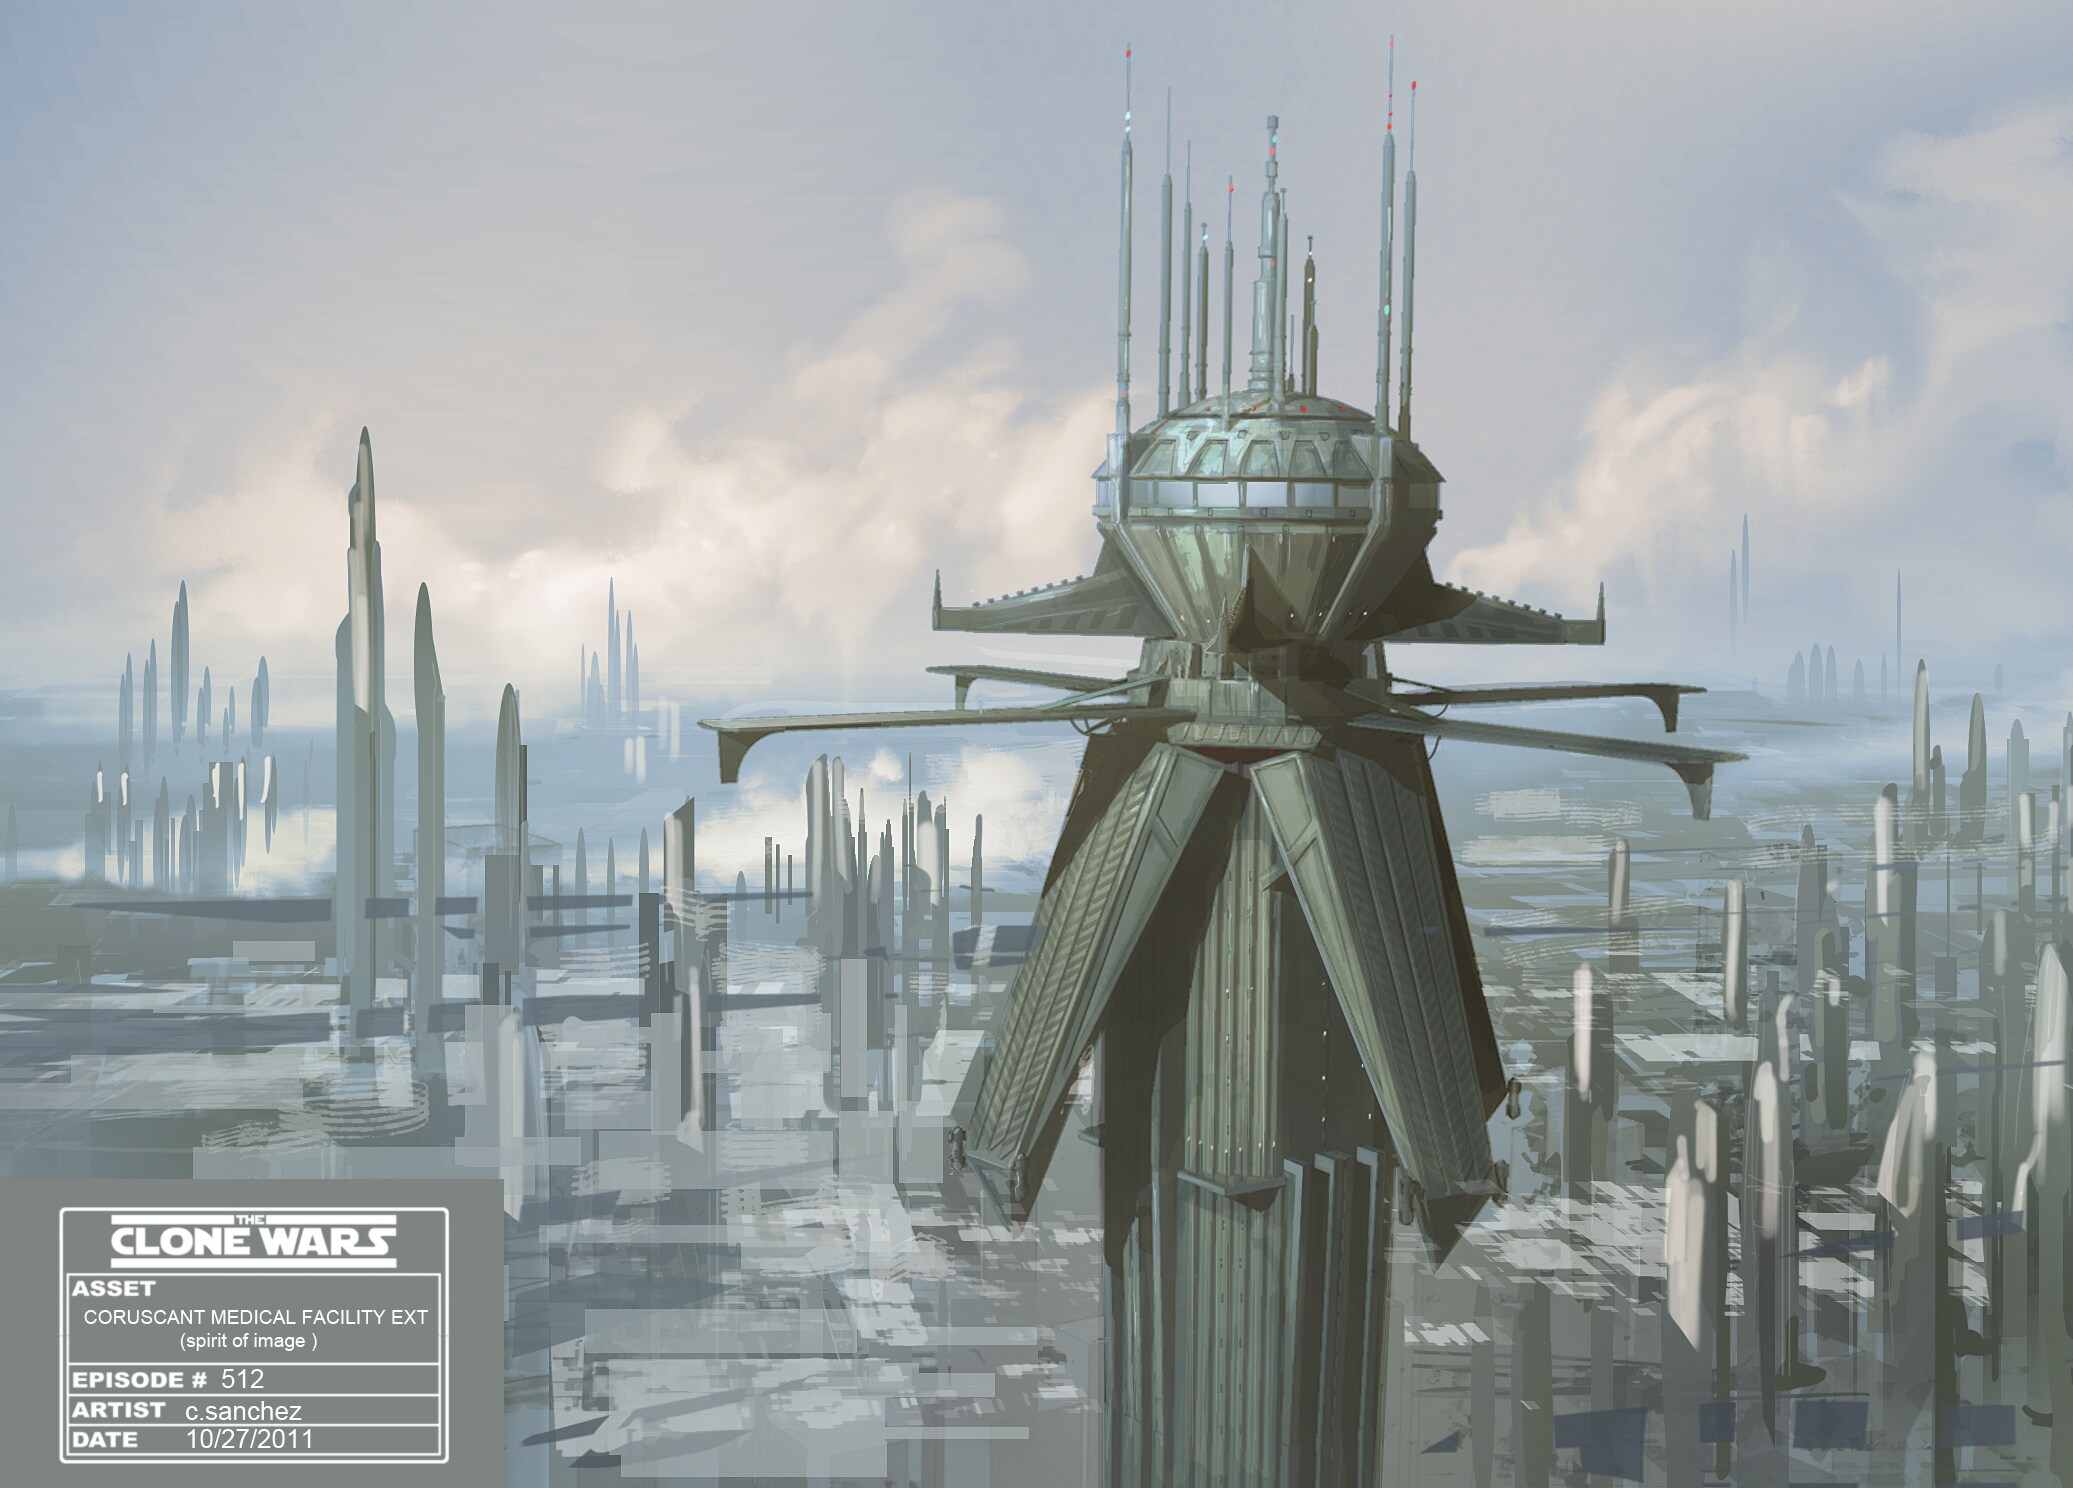 Coruscant medical facility illustration (dated October 27, 2011).